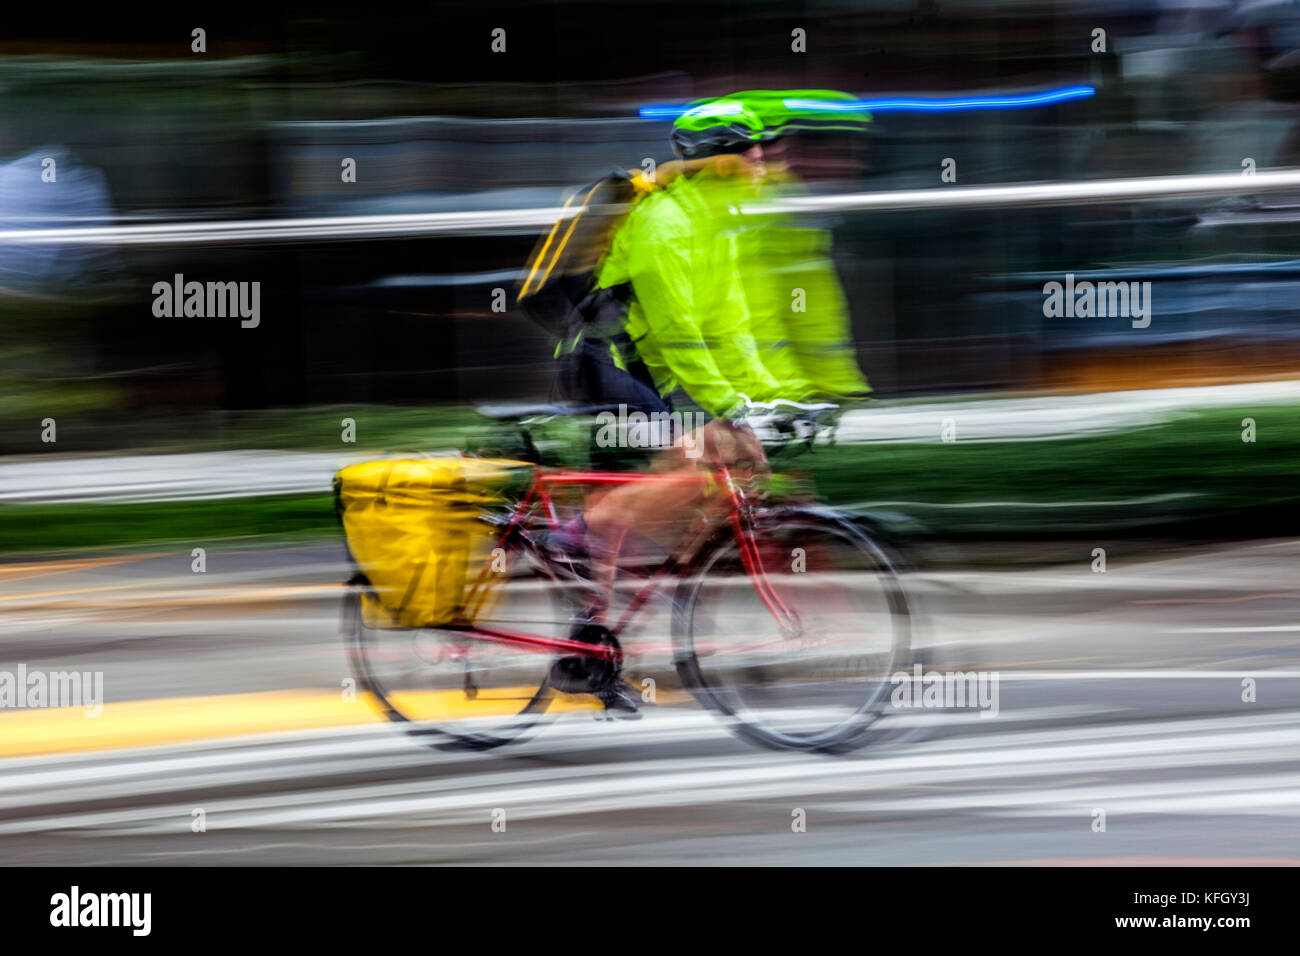 WA14185-00...WASHINGTON - Bicycle ridder on a wet day in down town Seattle. (No MR) Stock Photo